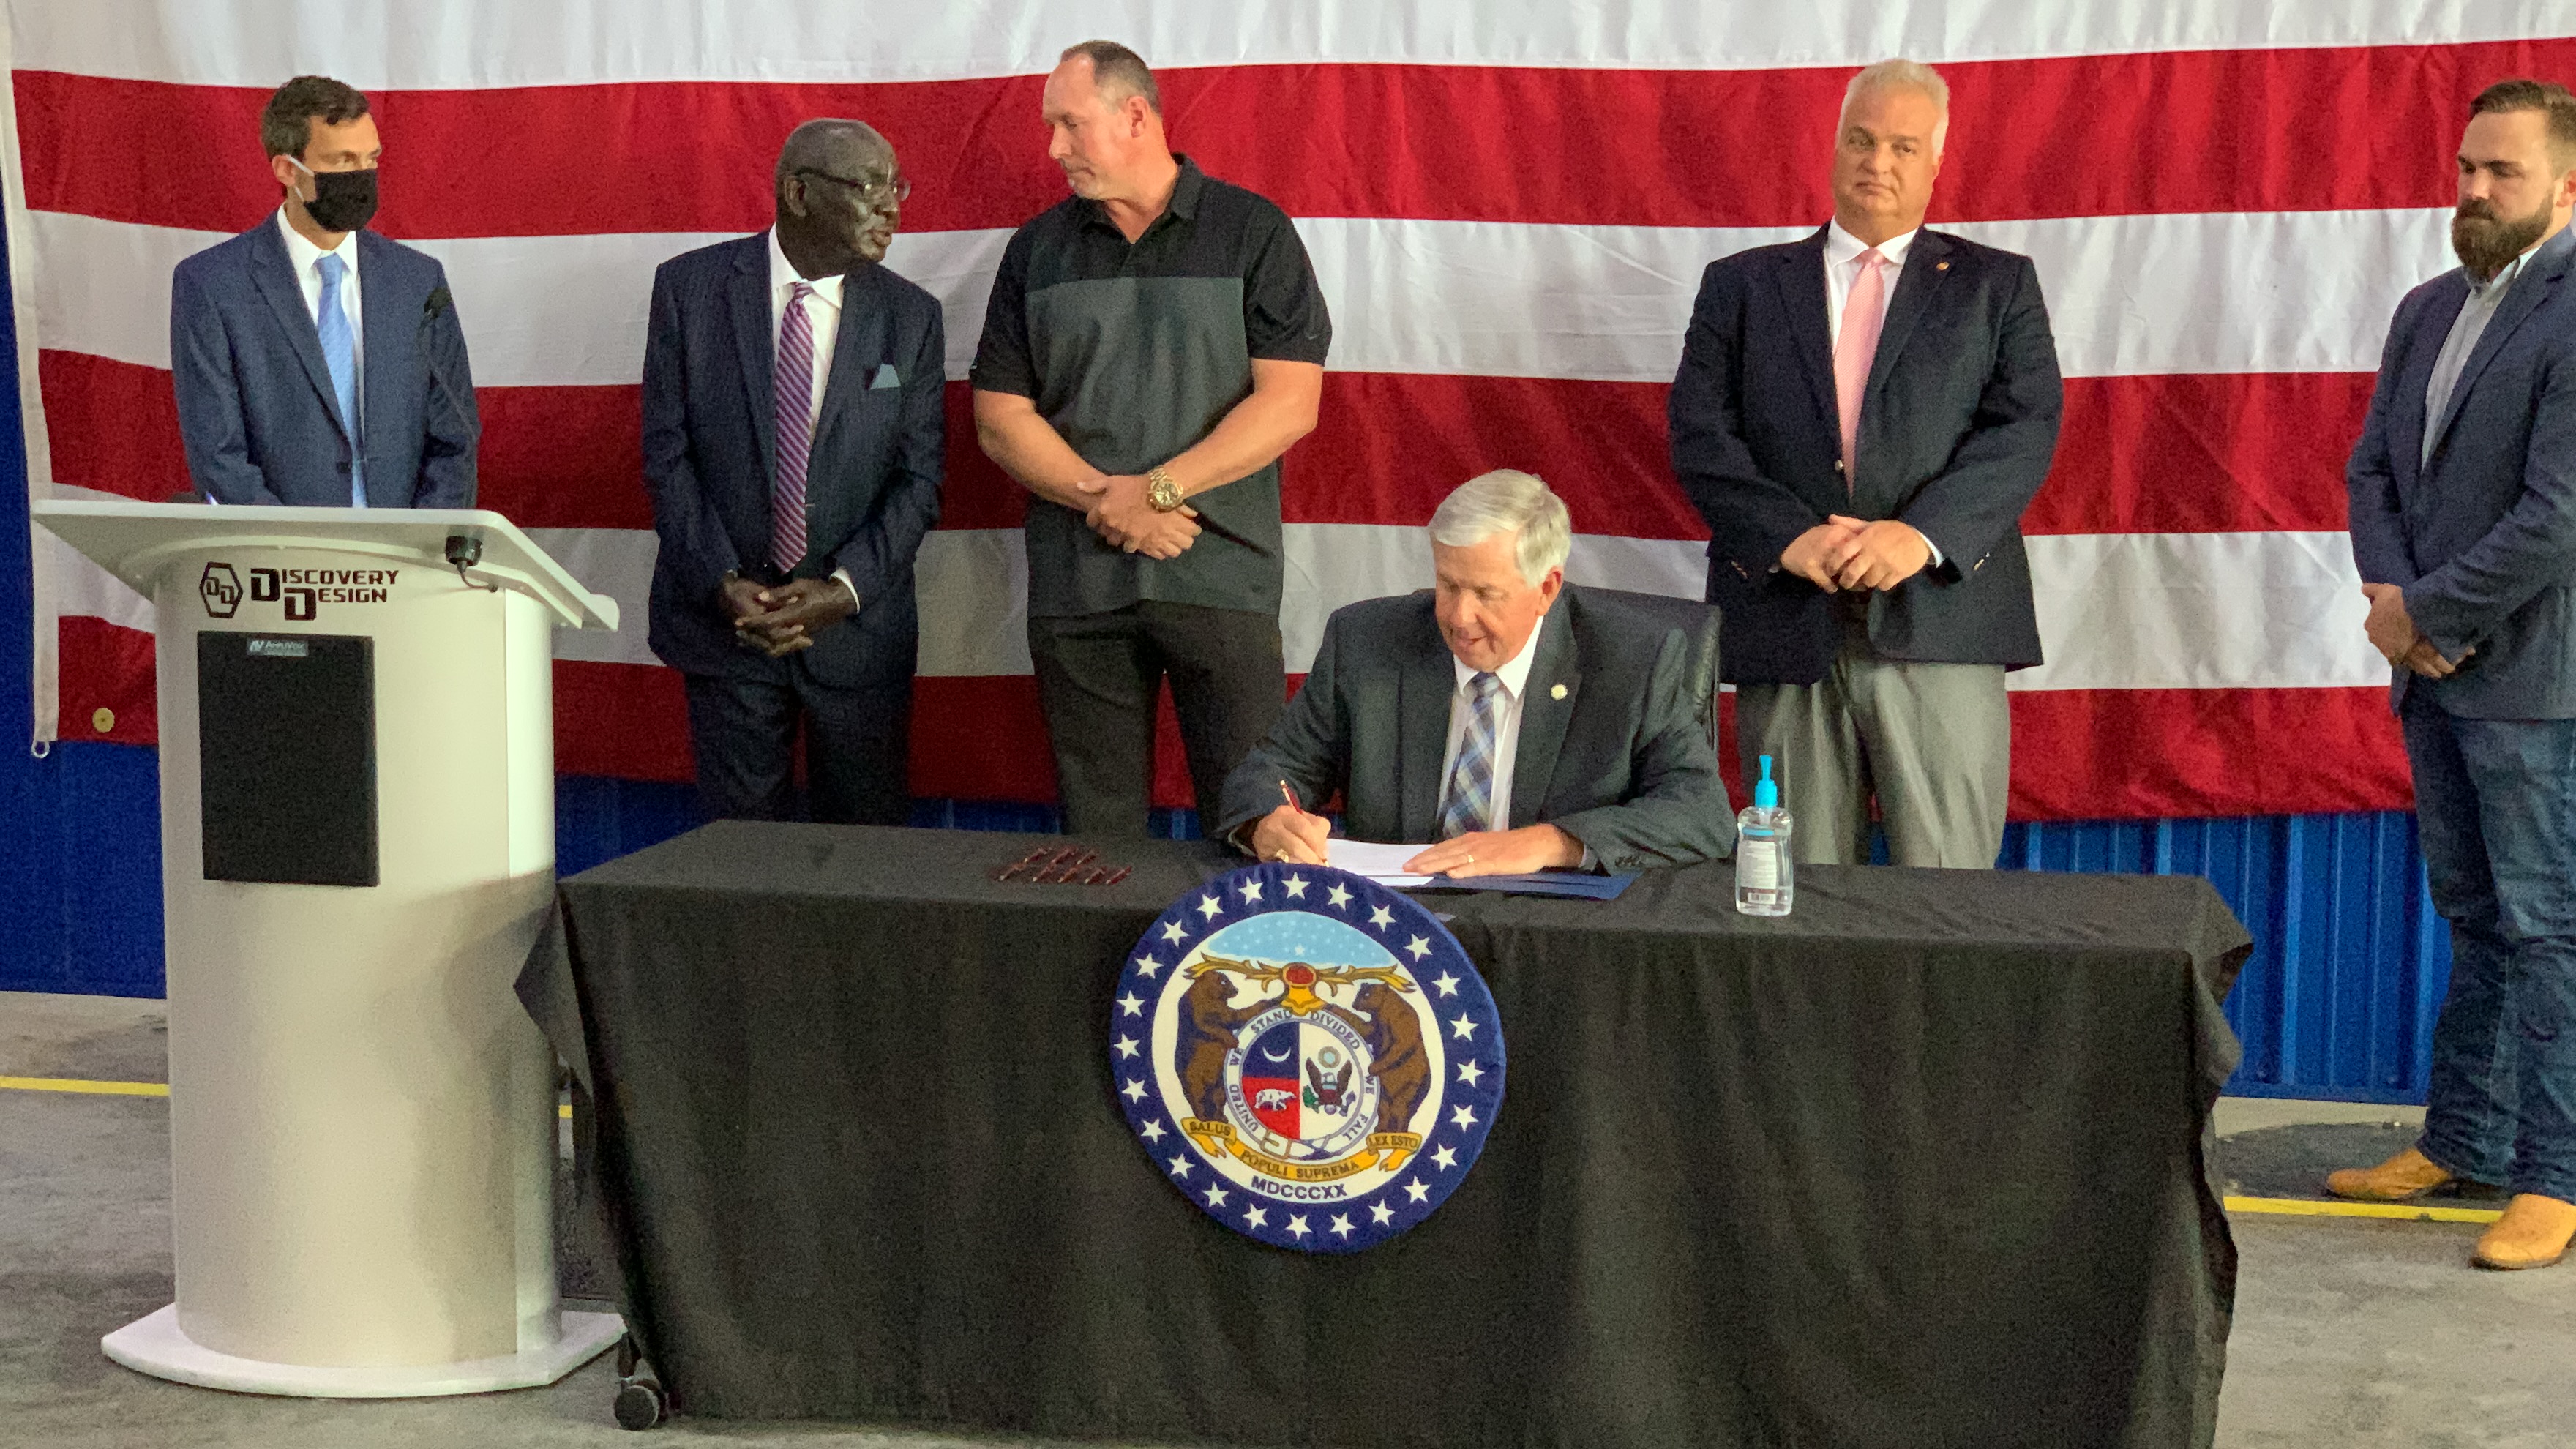 GOVERNOR PARSON SIGNS SB 591 REGARDING PUNITIVE DAMAGES AND UNLAWFUL MERCHANDISING PRACTICES